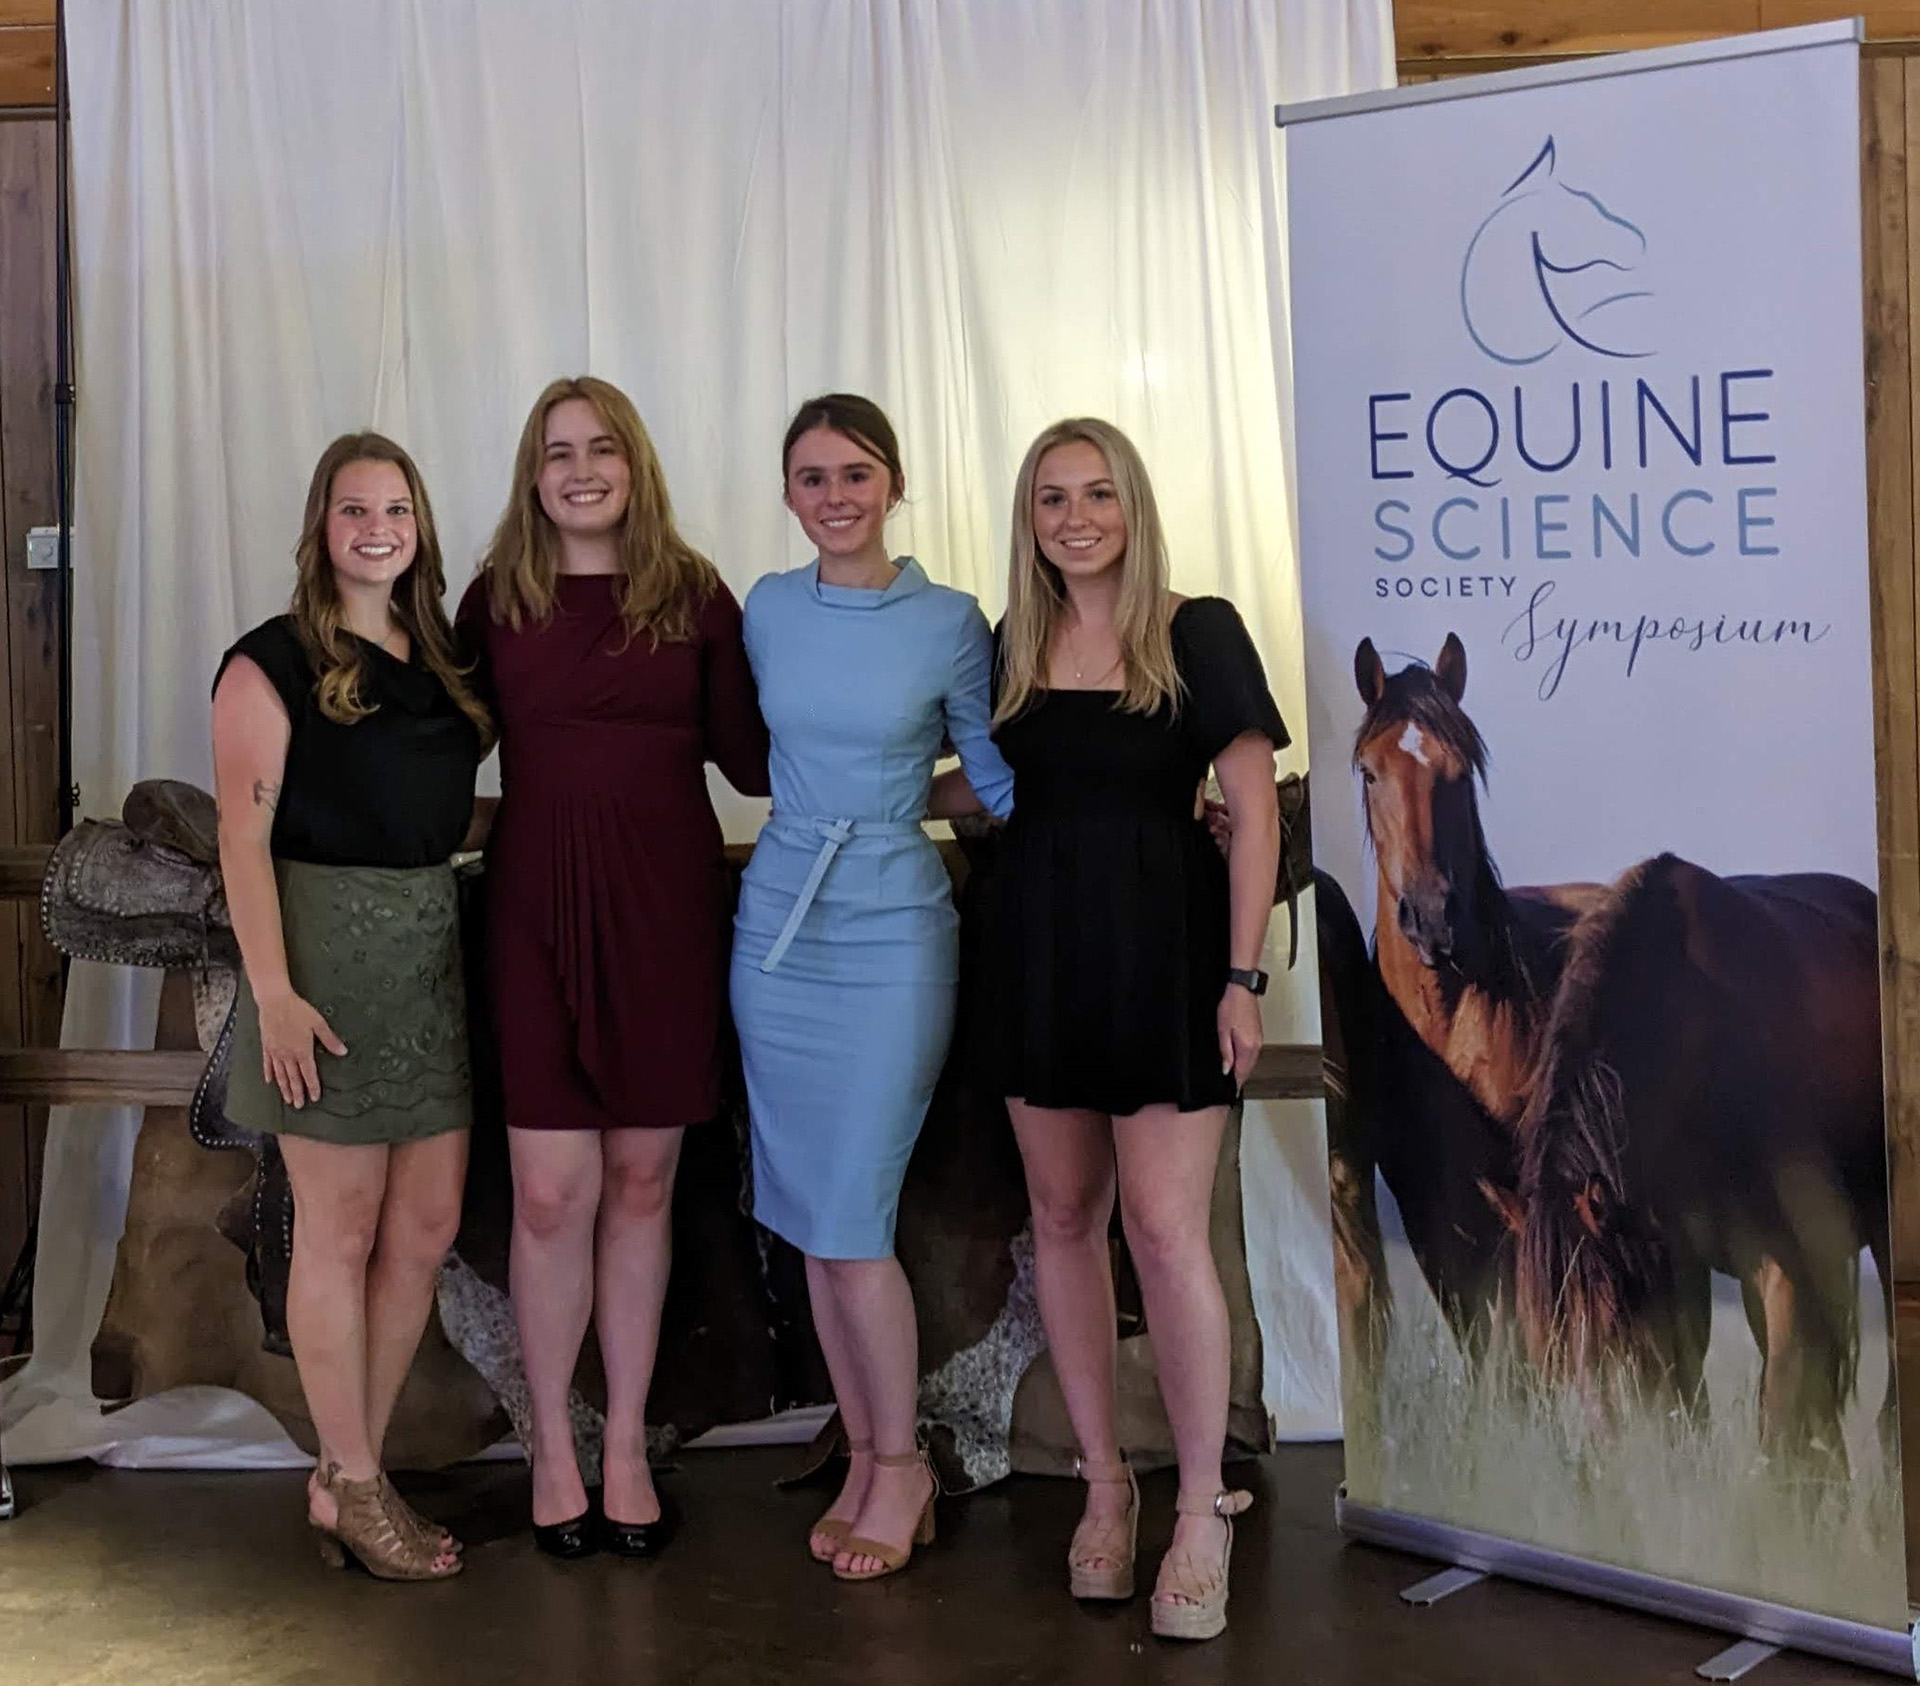 Horse Science Graduate Students present research and receive recognition at international conference